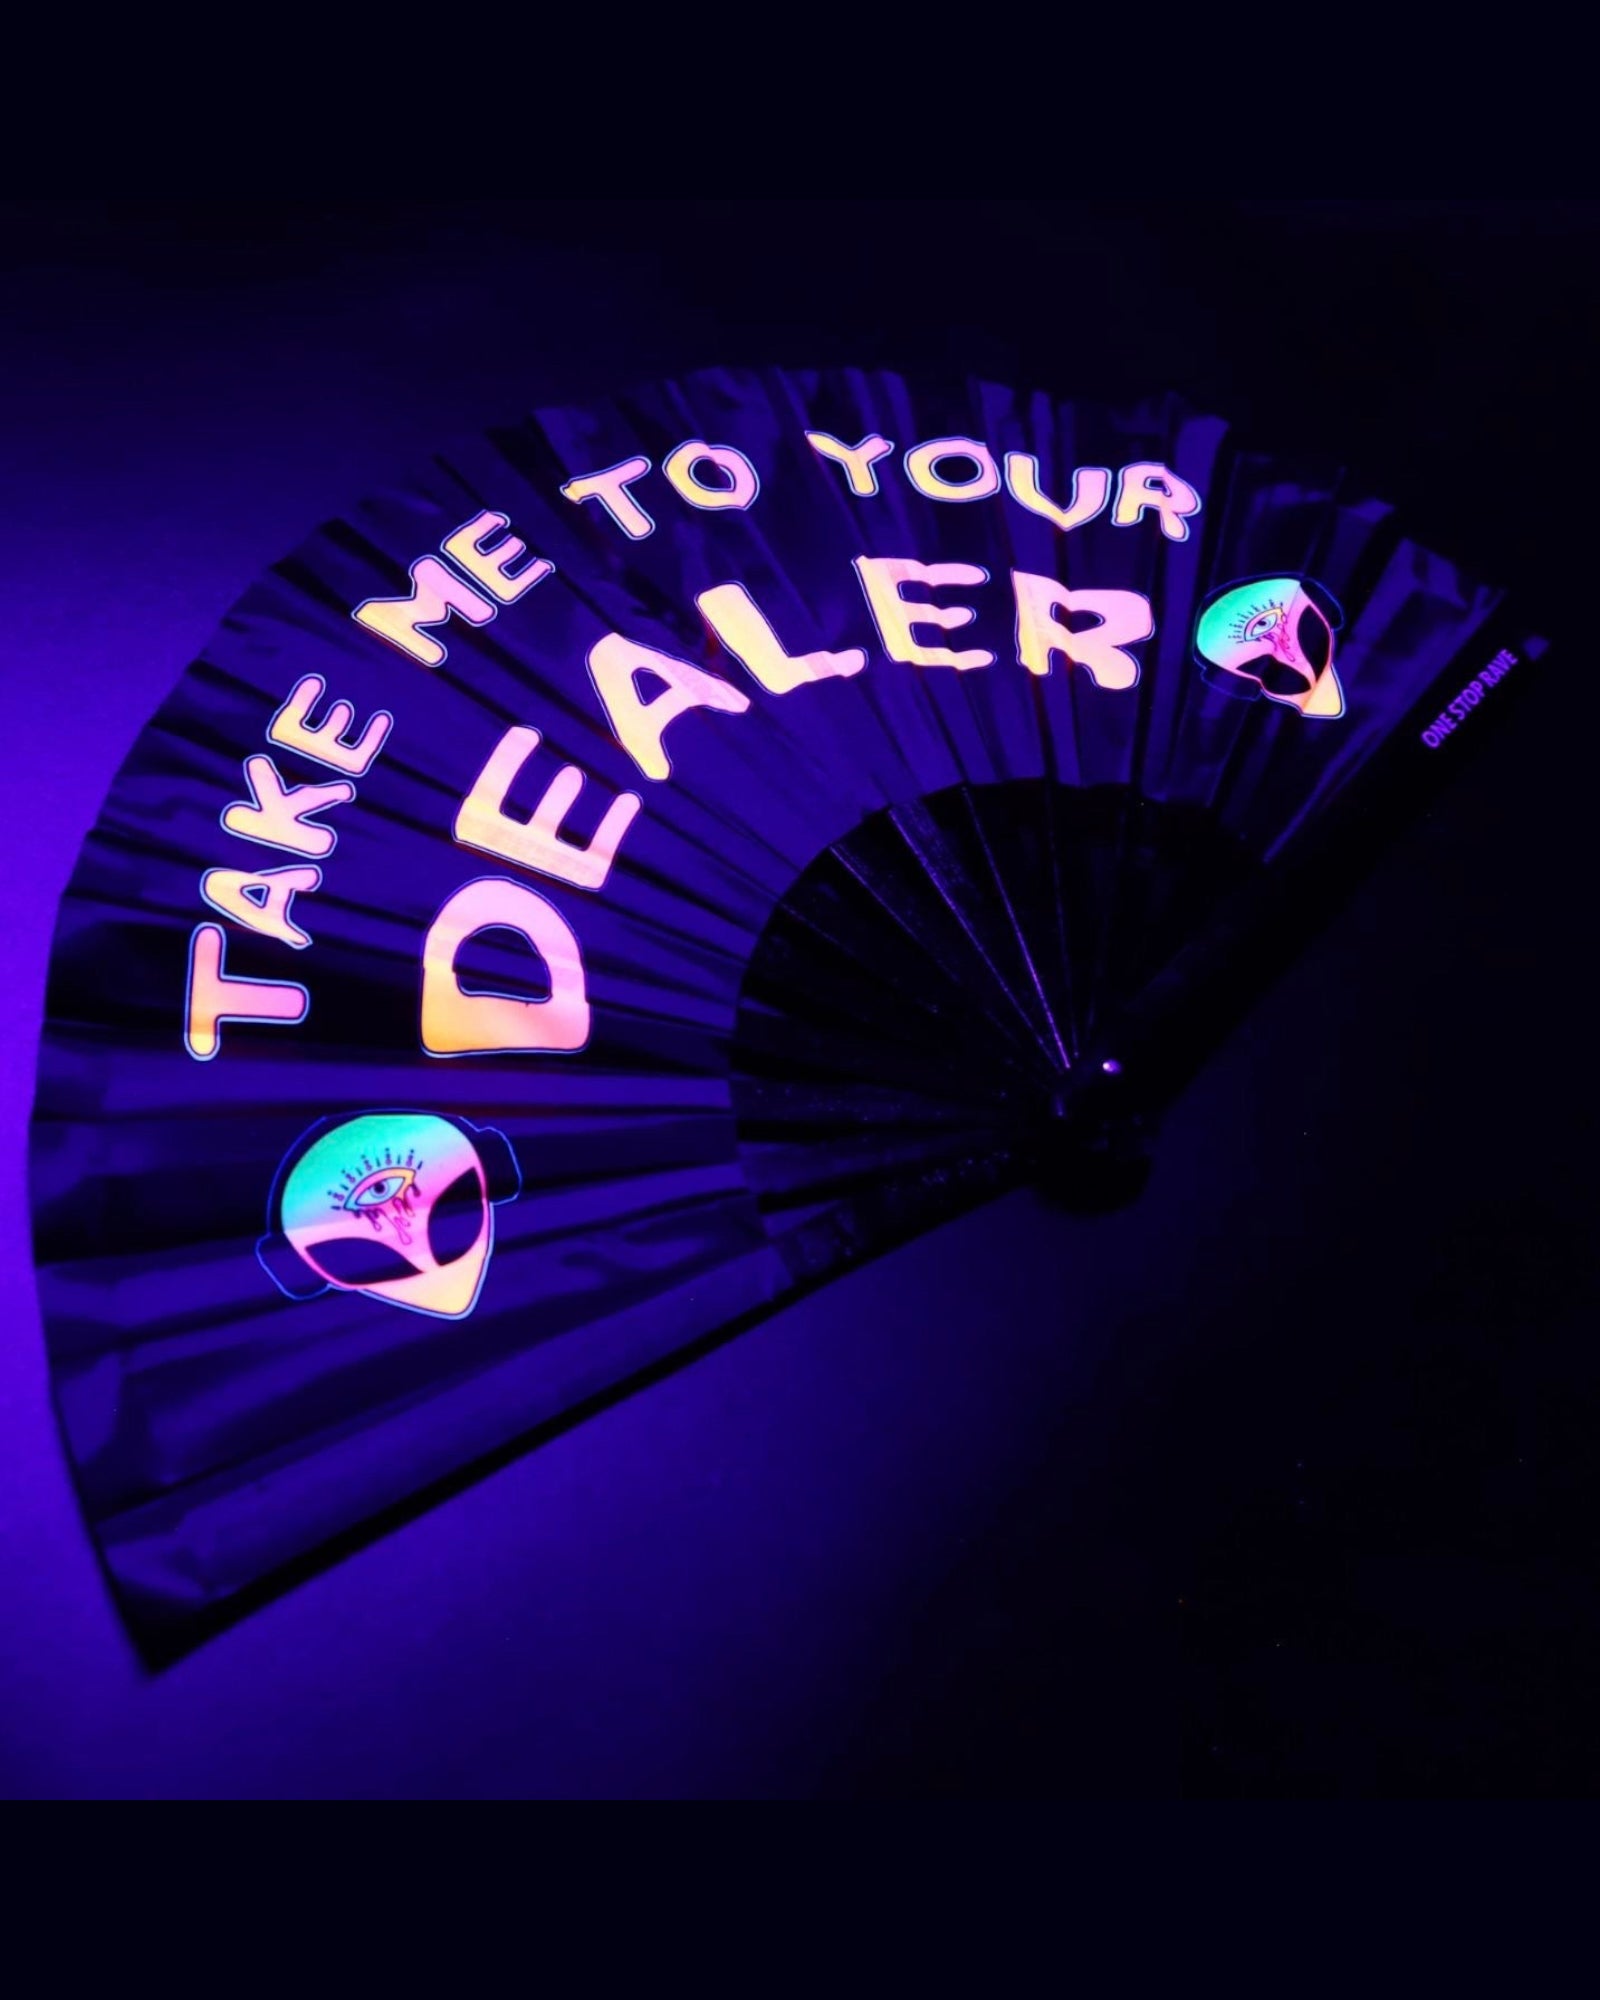 Take Me To Your Dealer Hand Fan, Festival Fans 13.5", - One Stop Rave